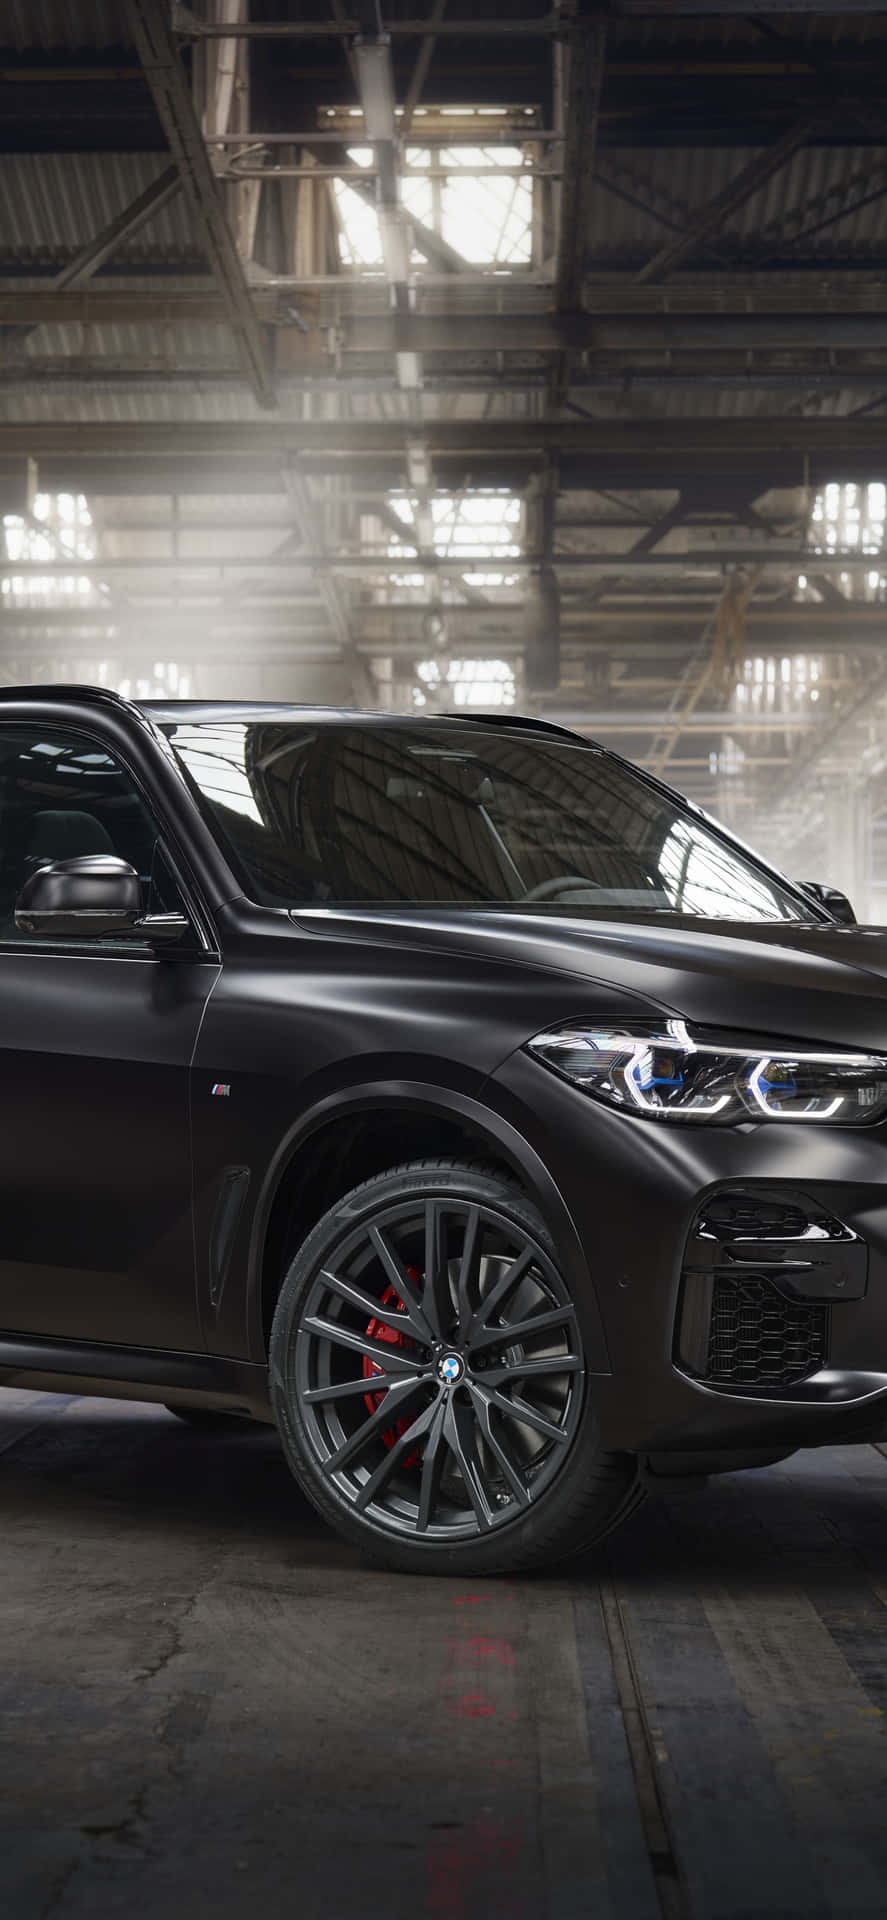 Impressively Powerful Bmw X6 M On The Road